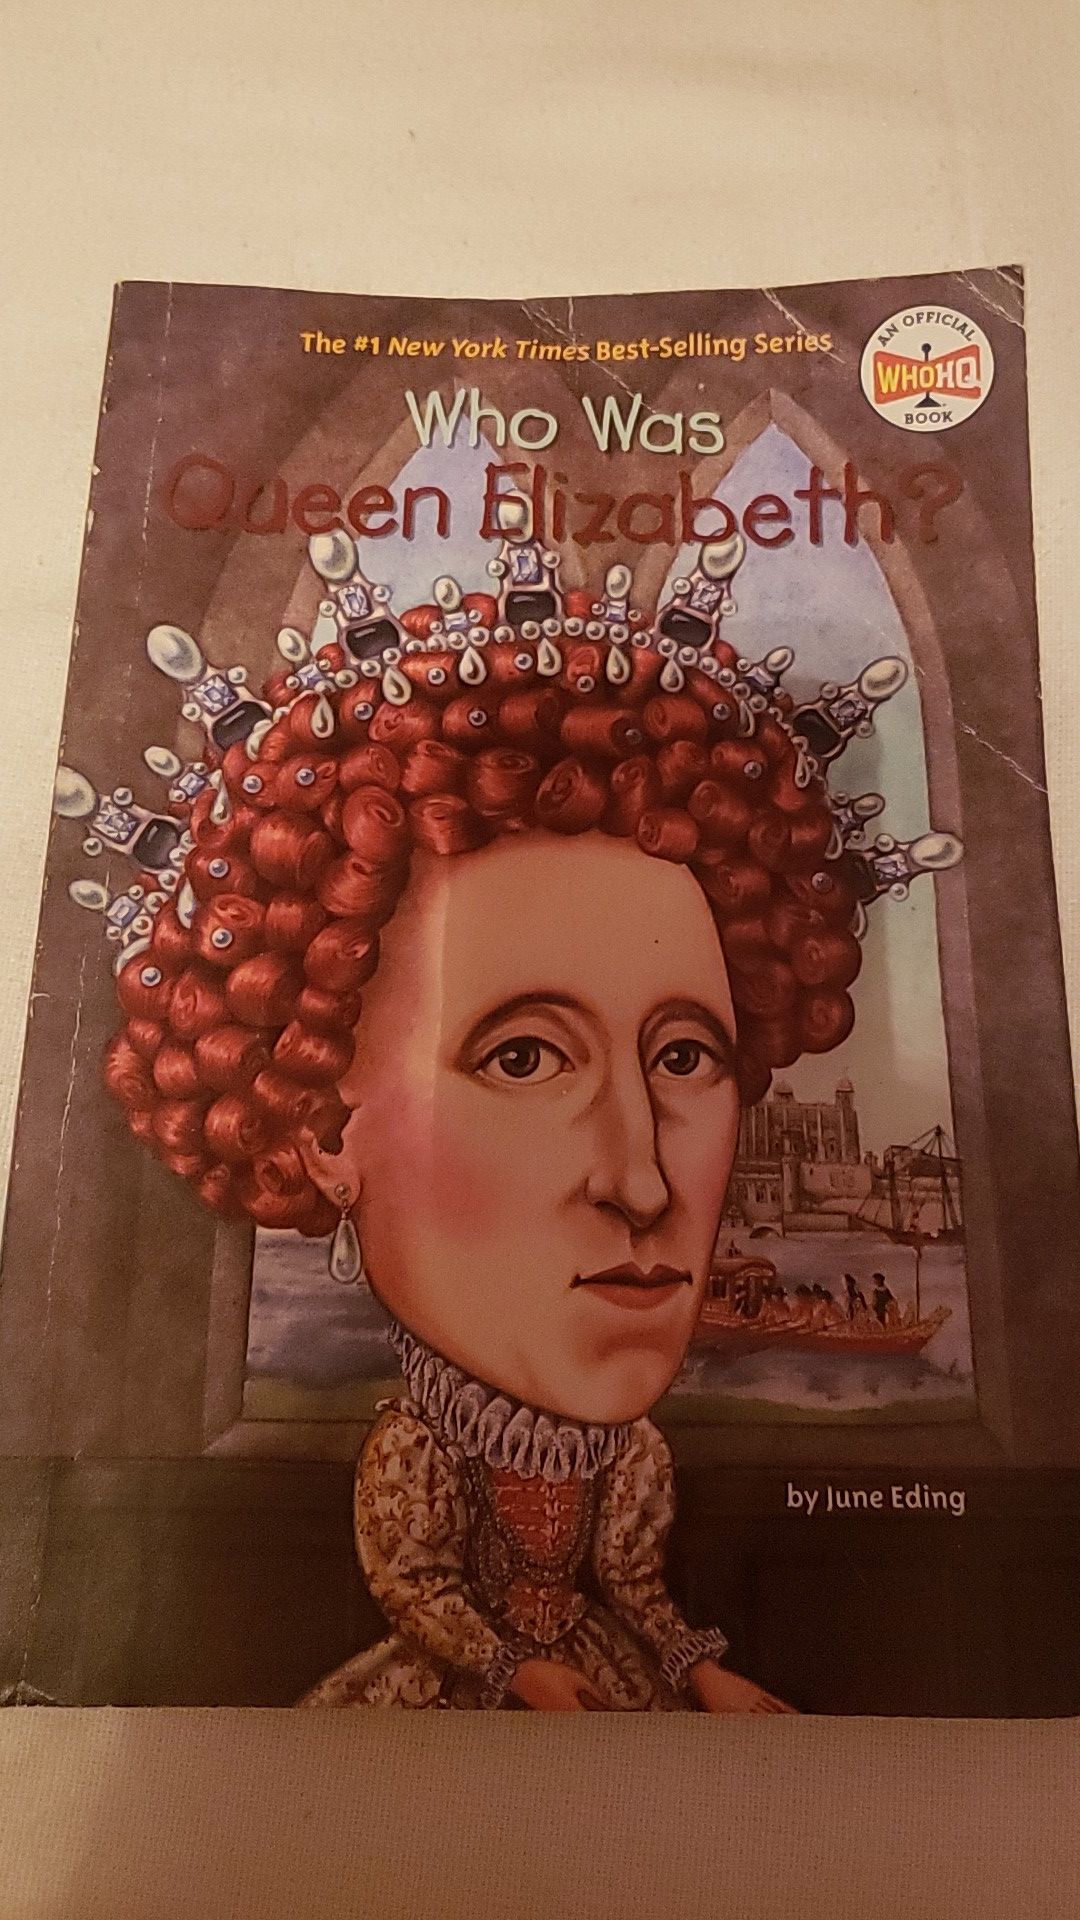 "Who was the Queen of England?" Book